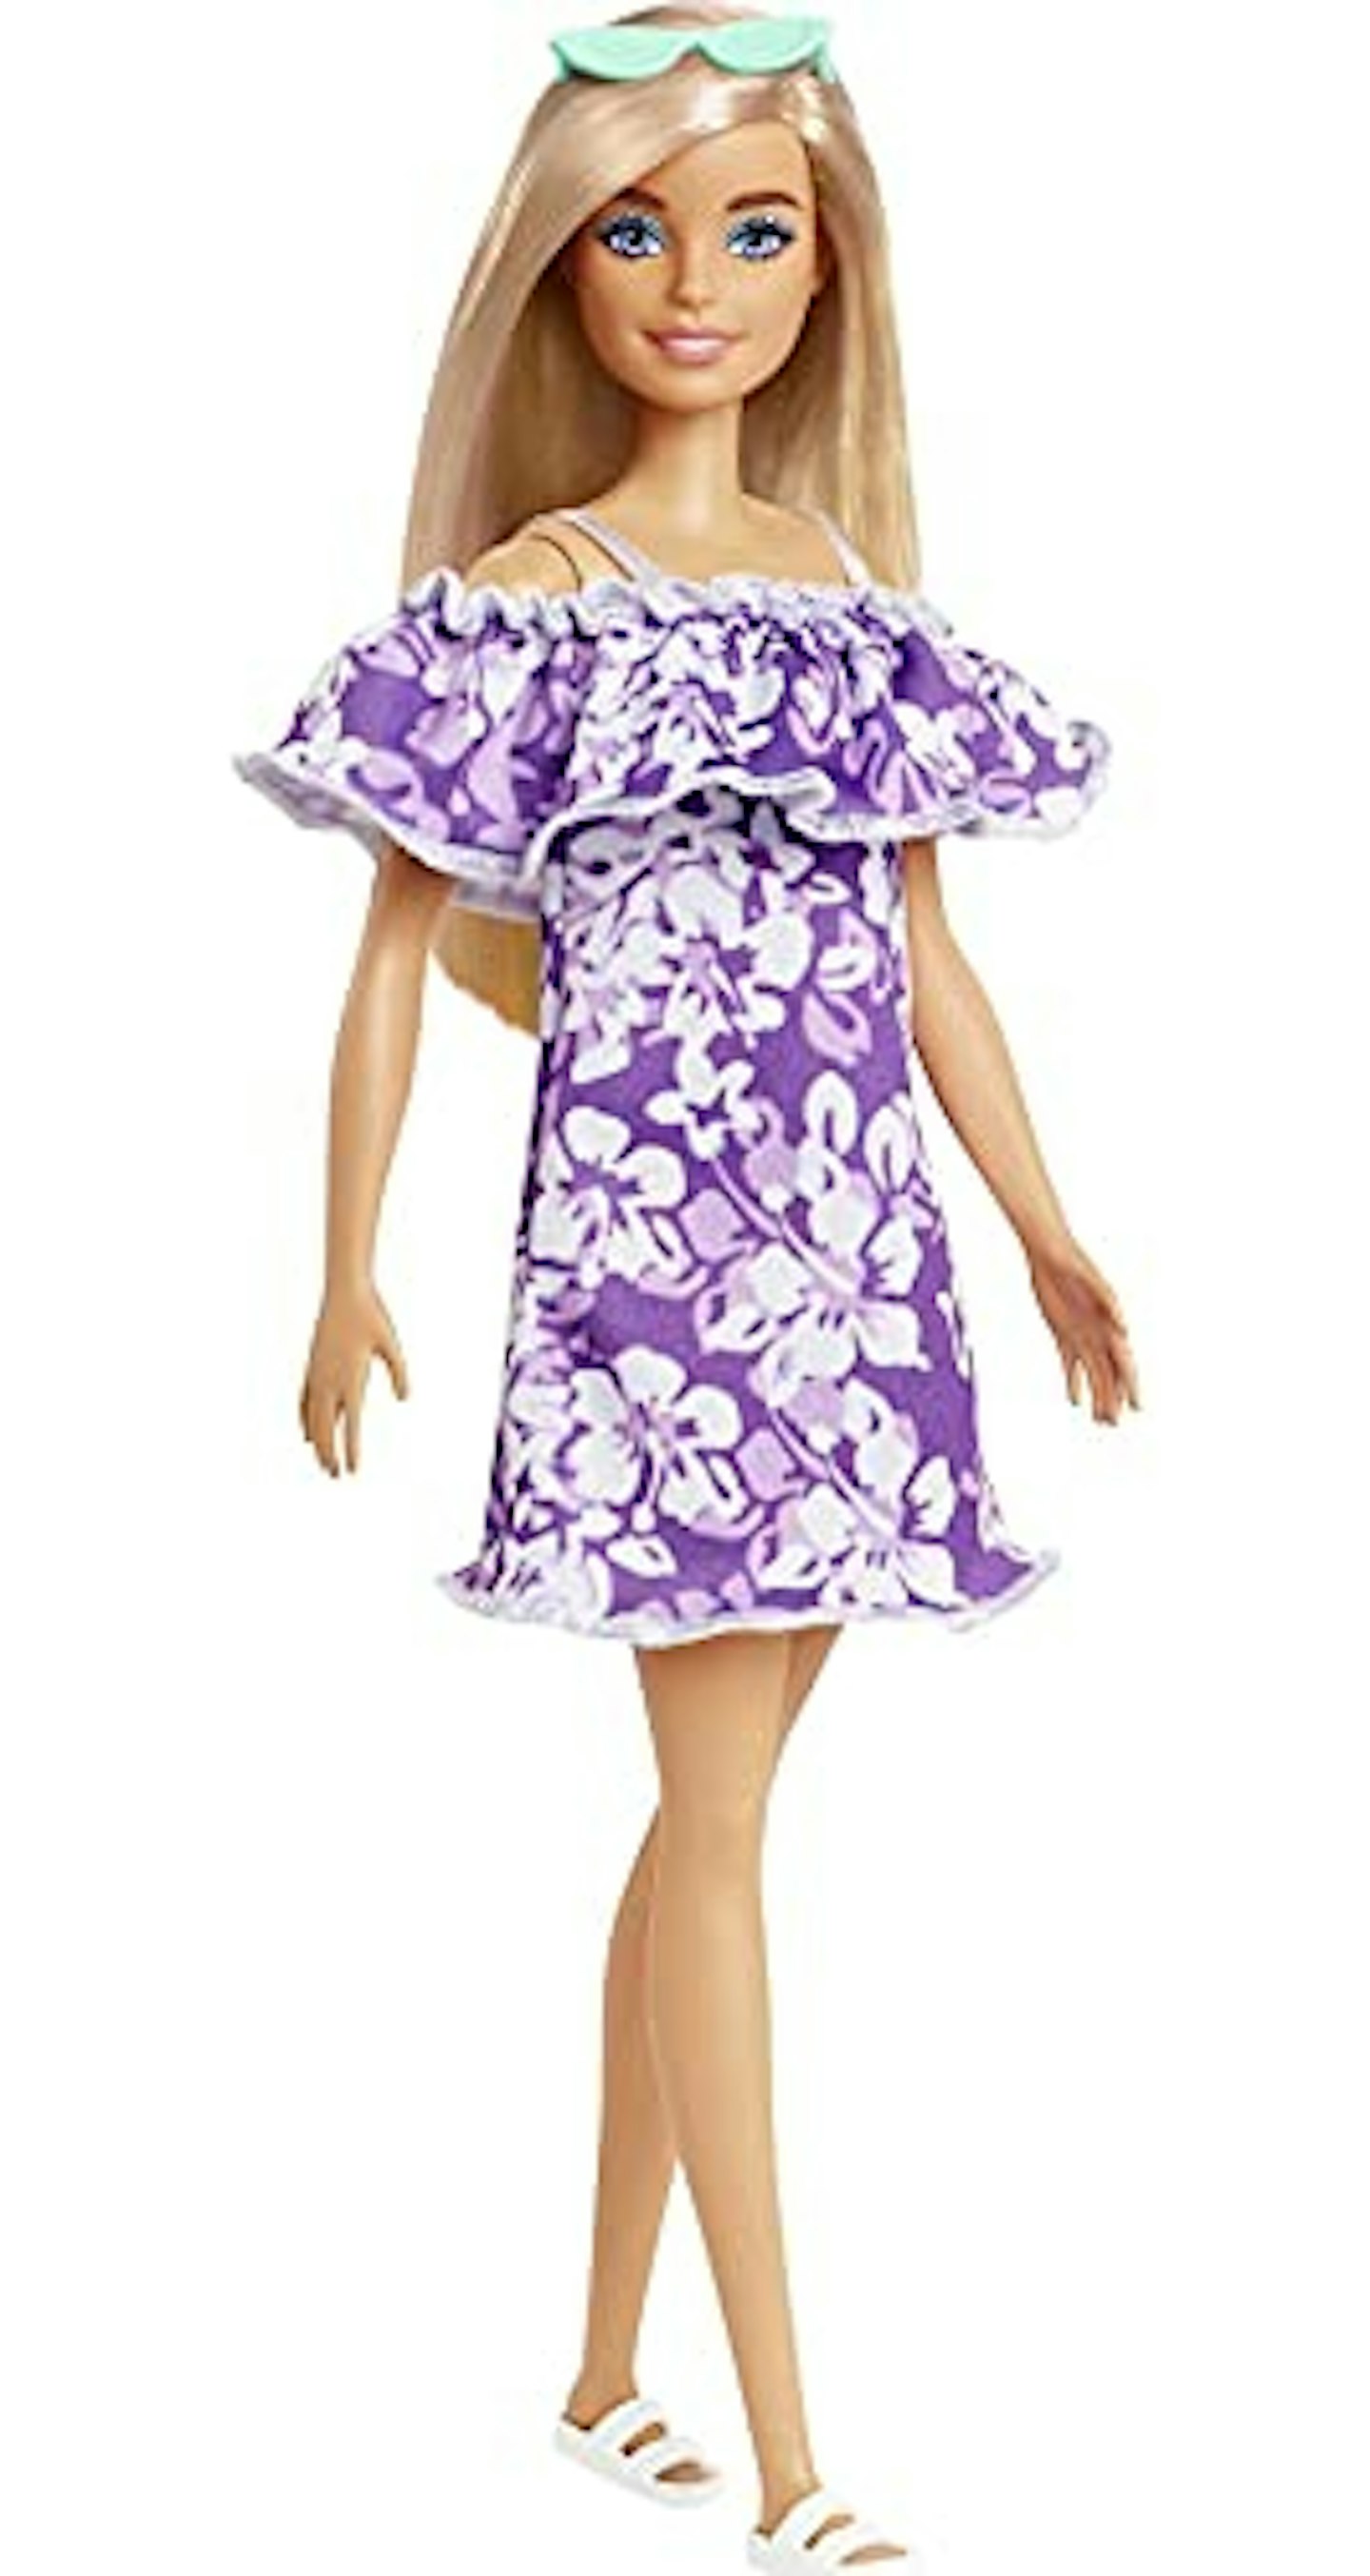 Barbie Loves the Ocean Doll with Purple Floral Dress